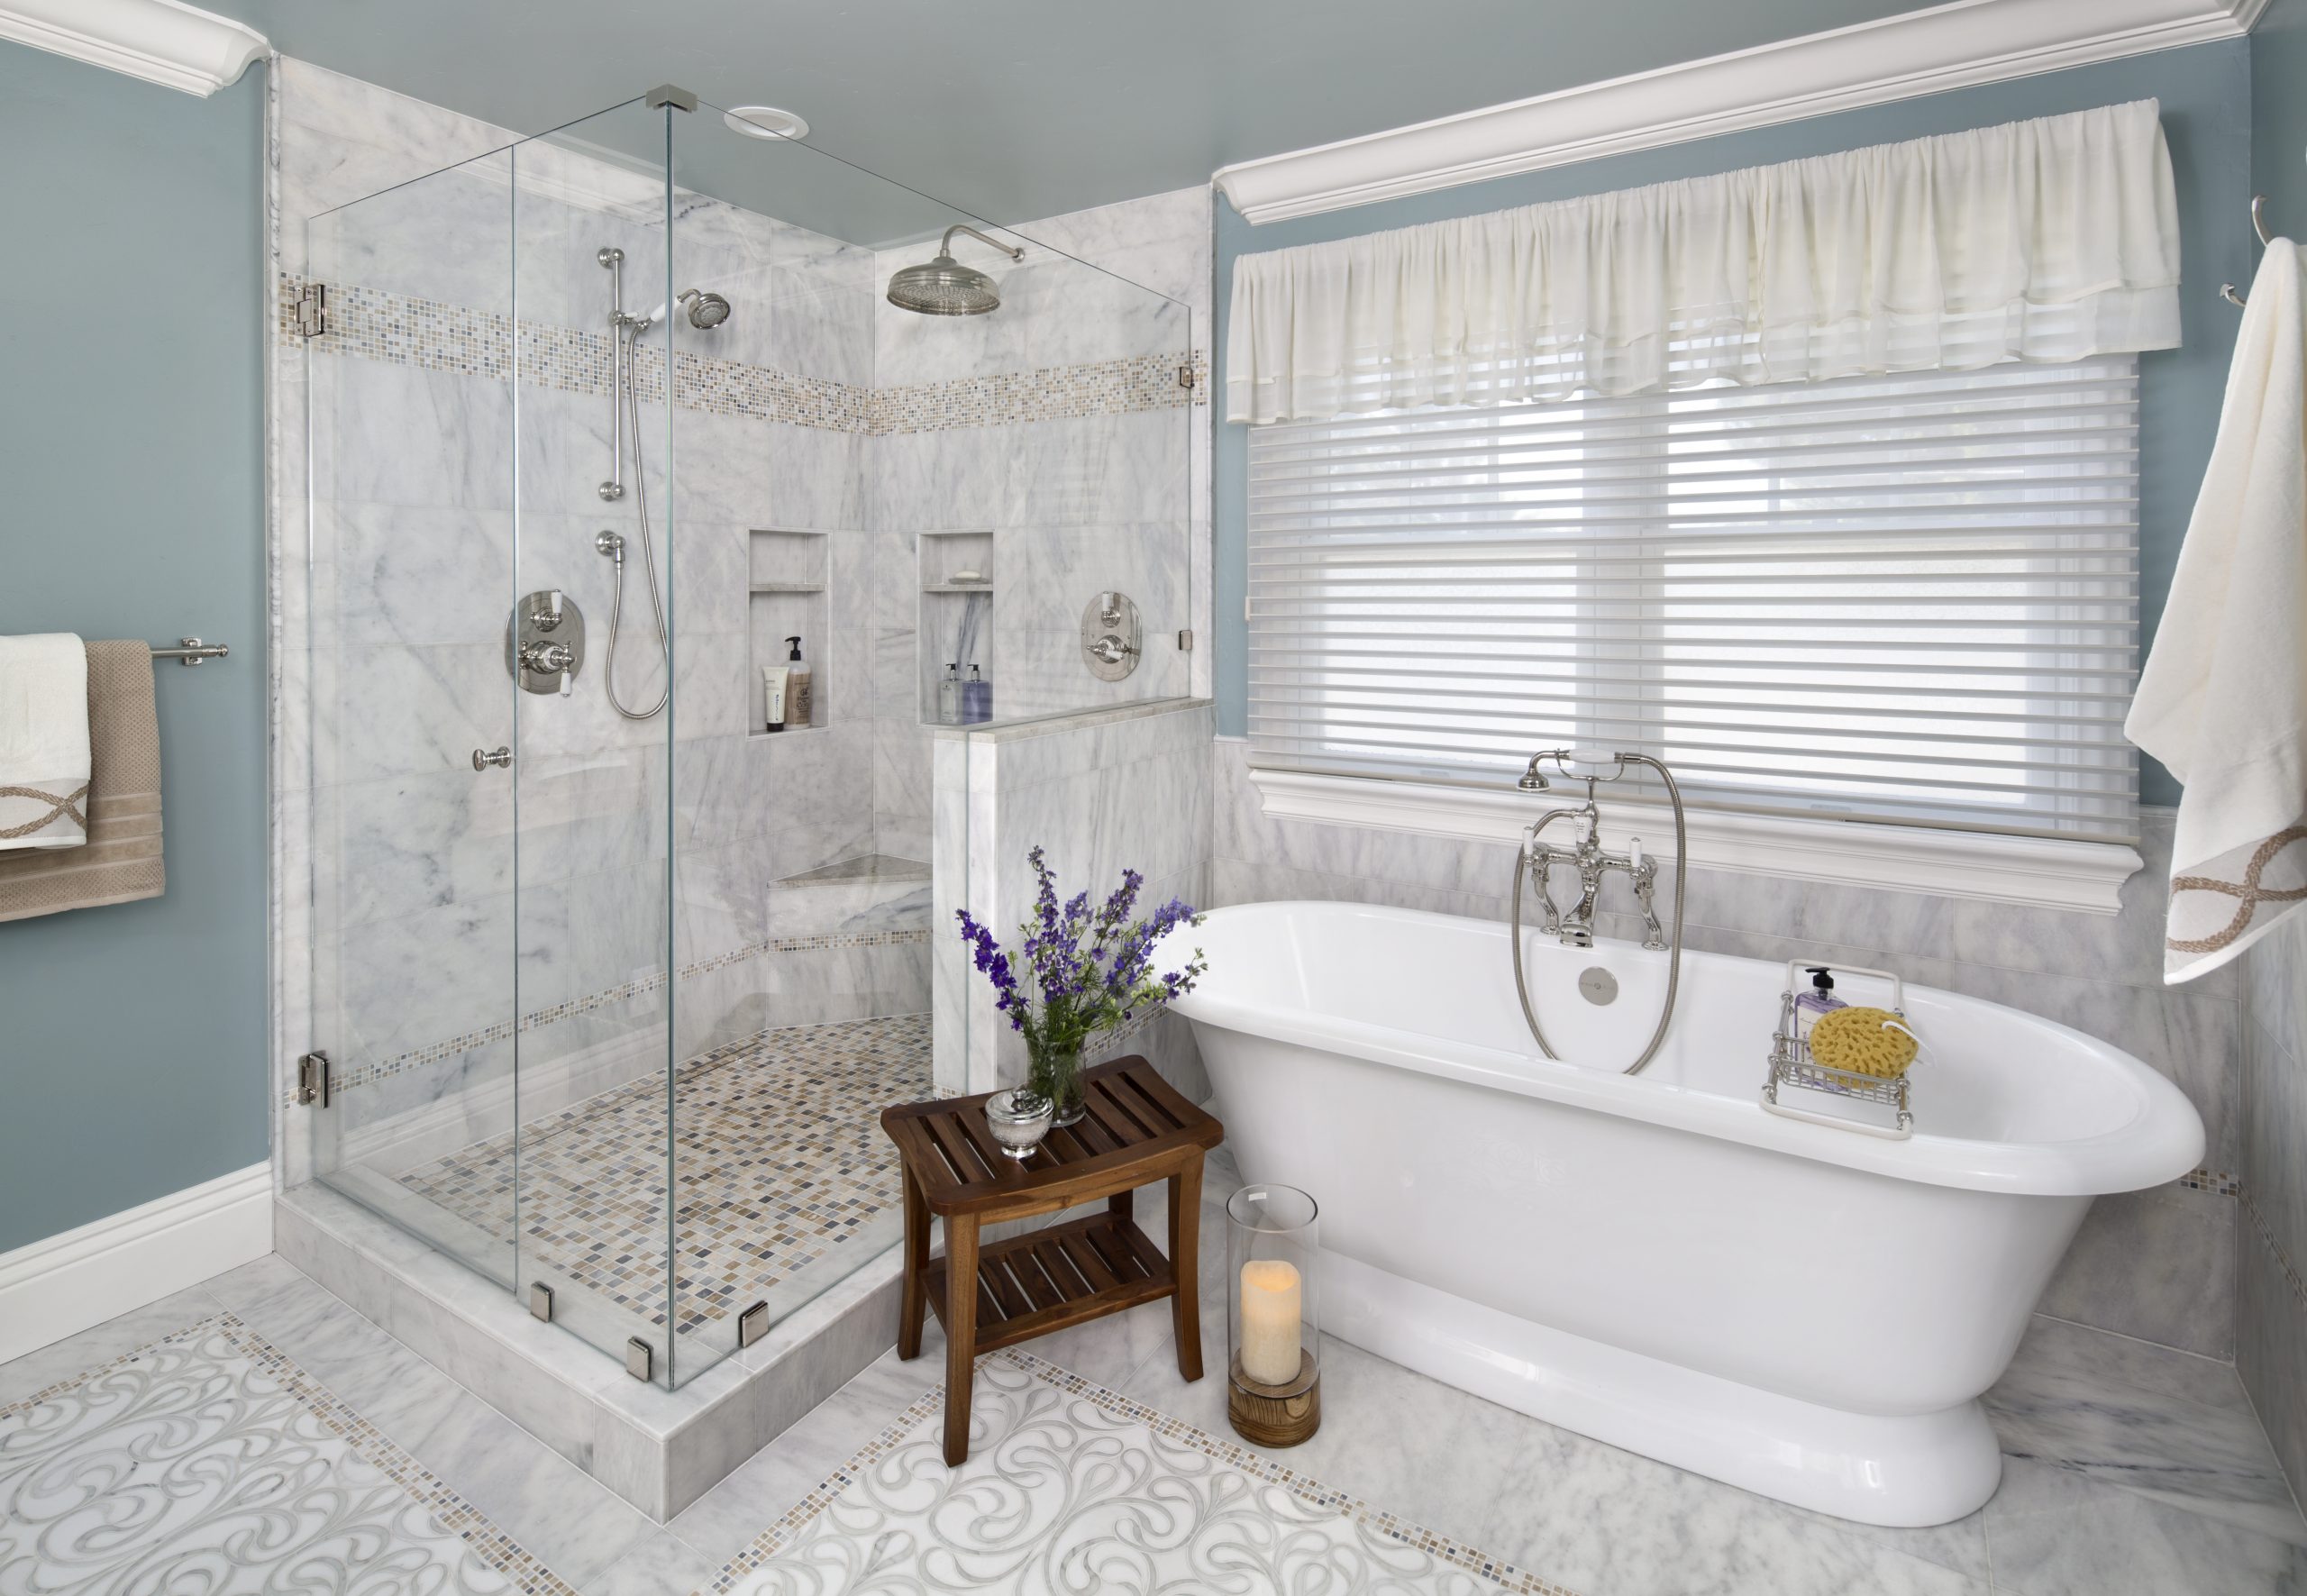 A white porcelain tub with a stone floor shower.